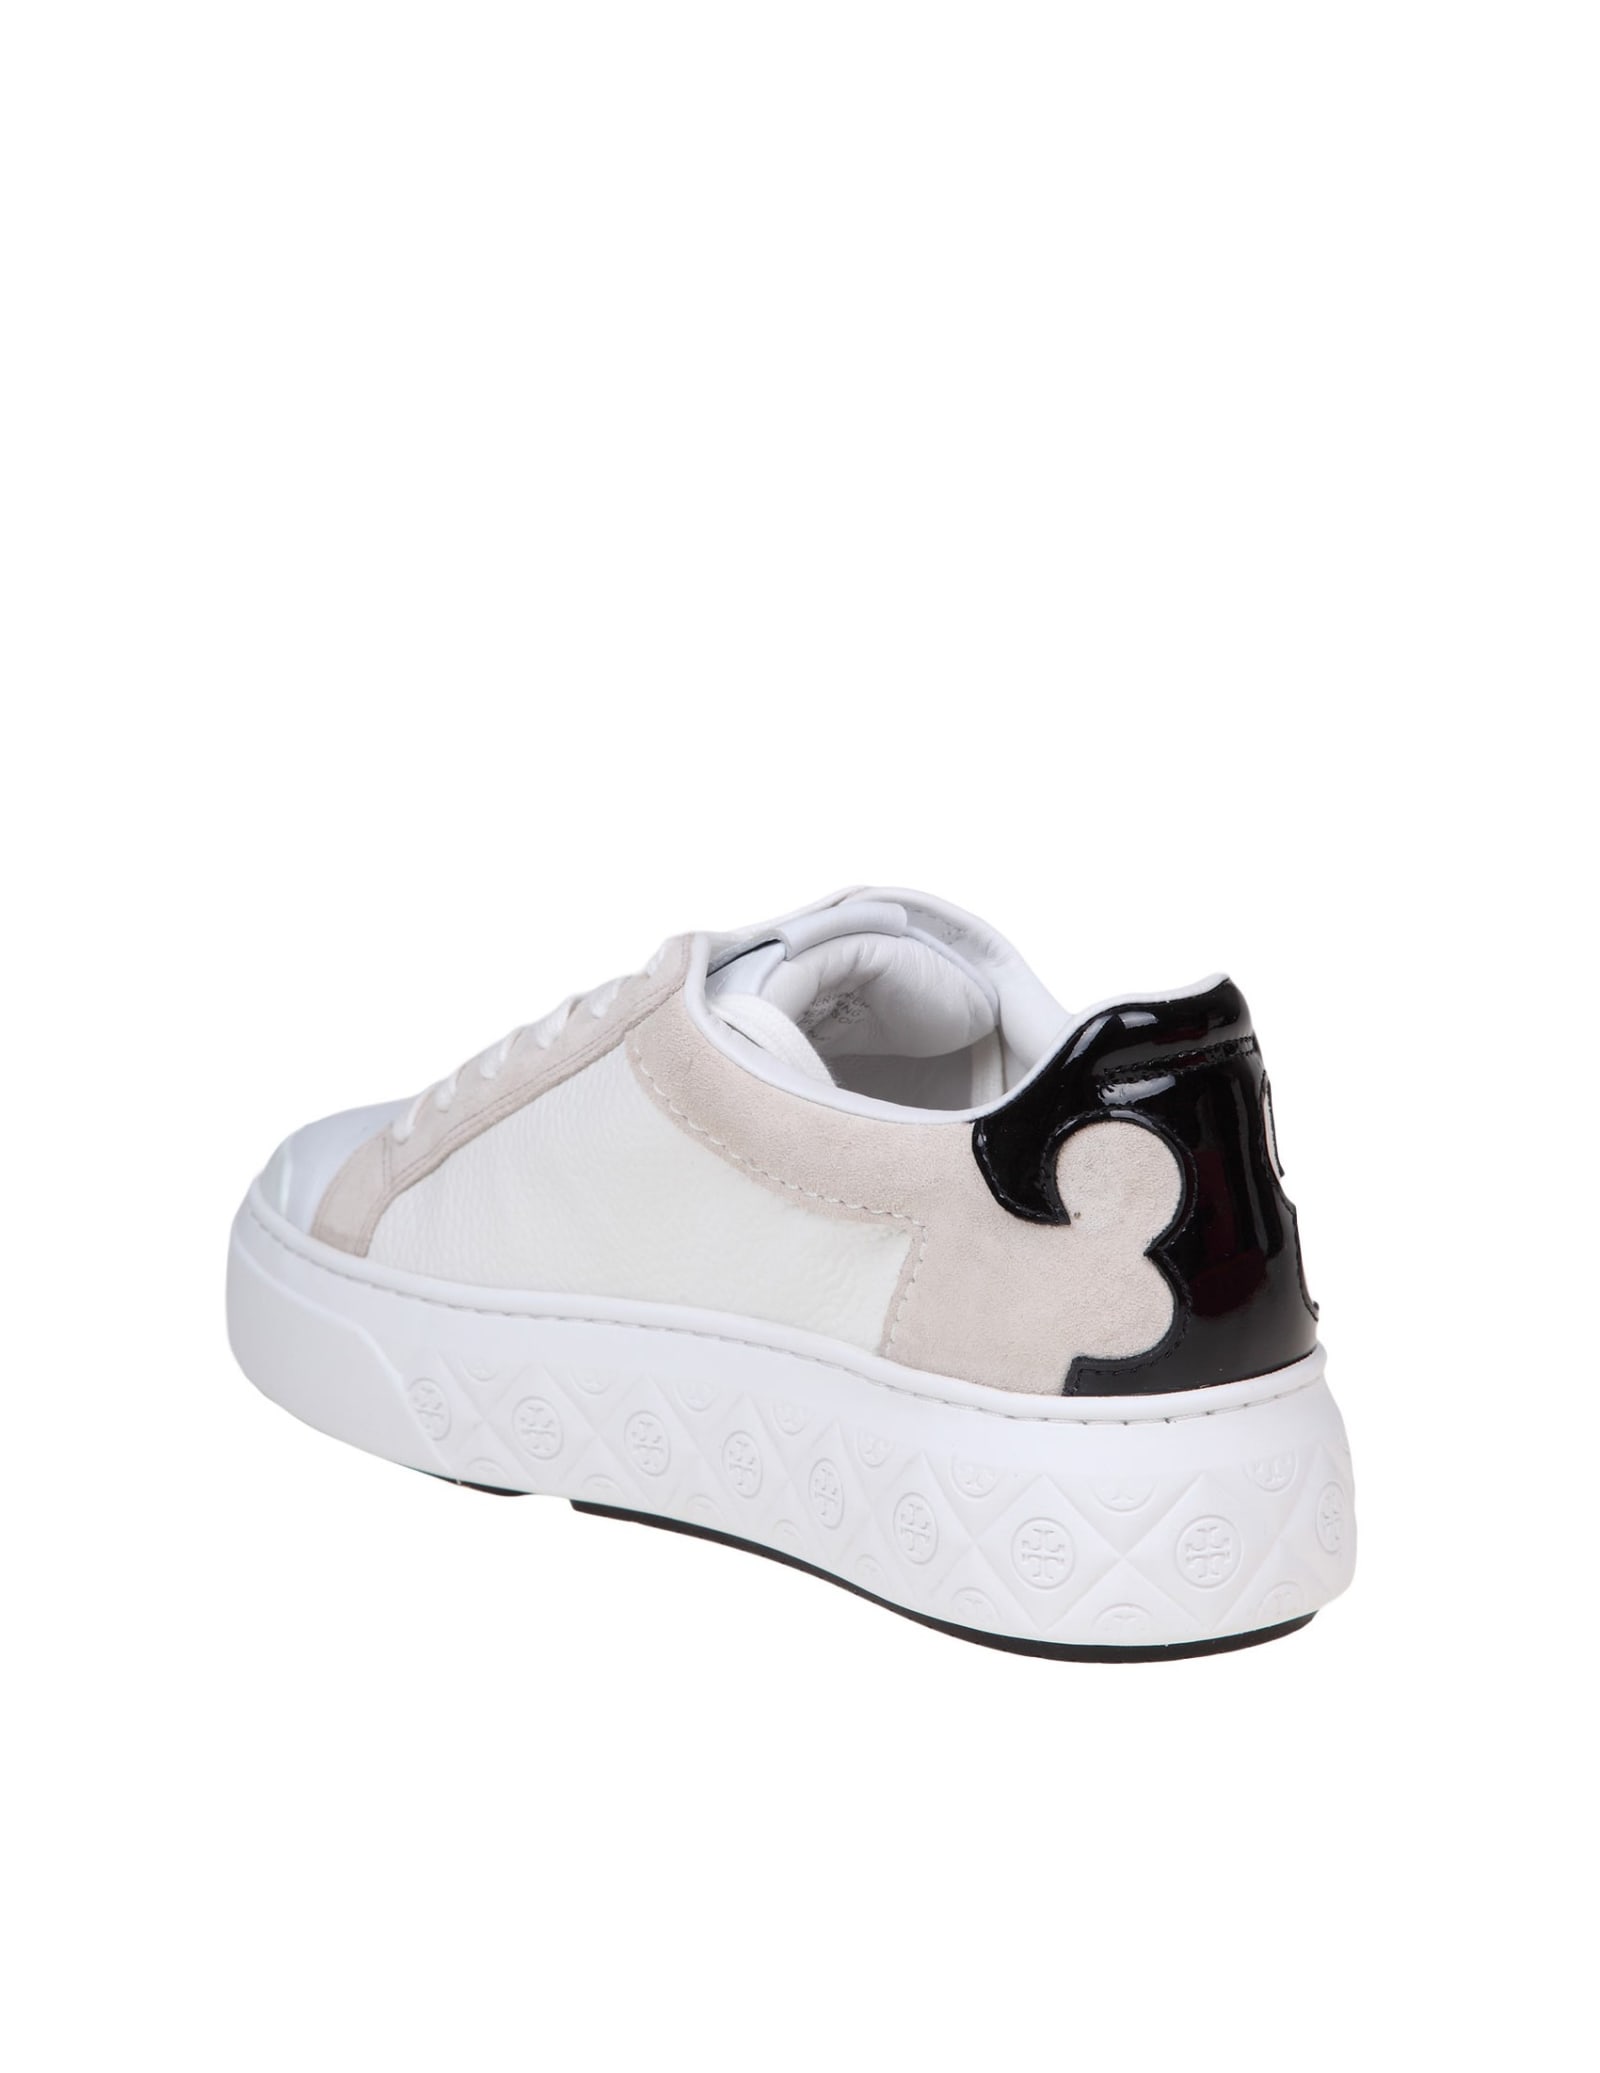 Shop Tory Burch Ladybug Sneakers In Black And White Leather In White/black